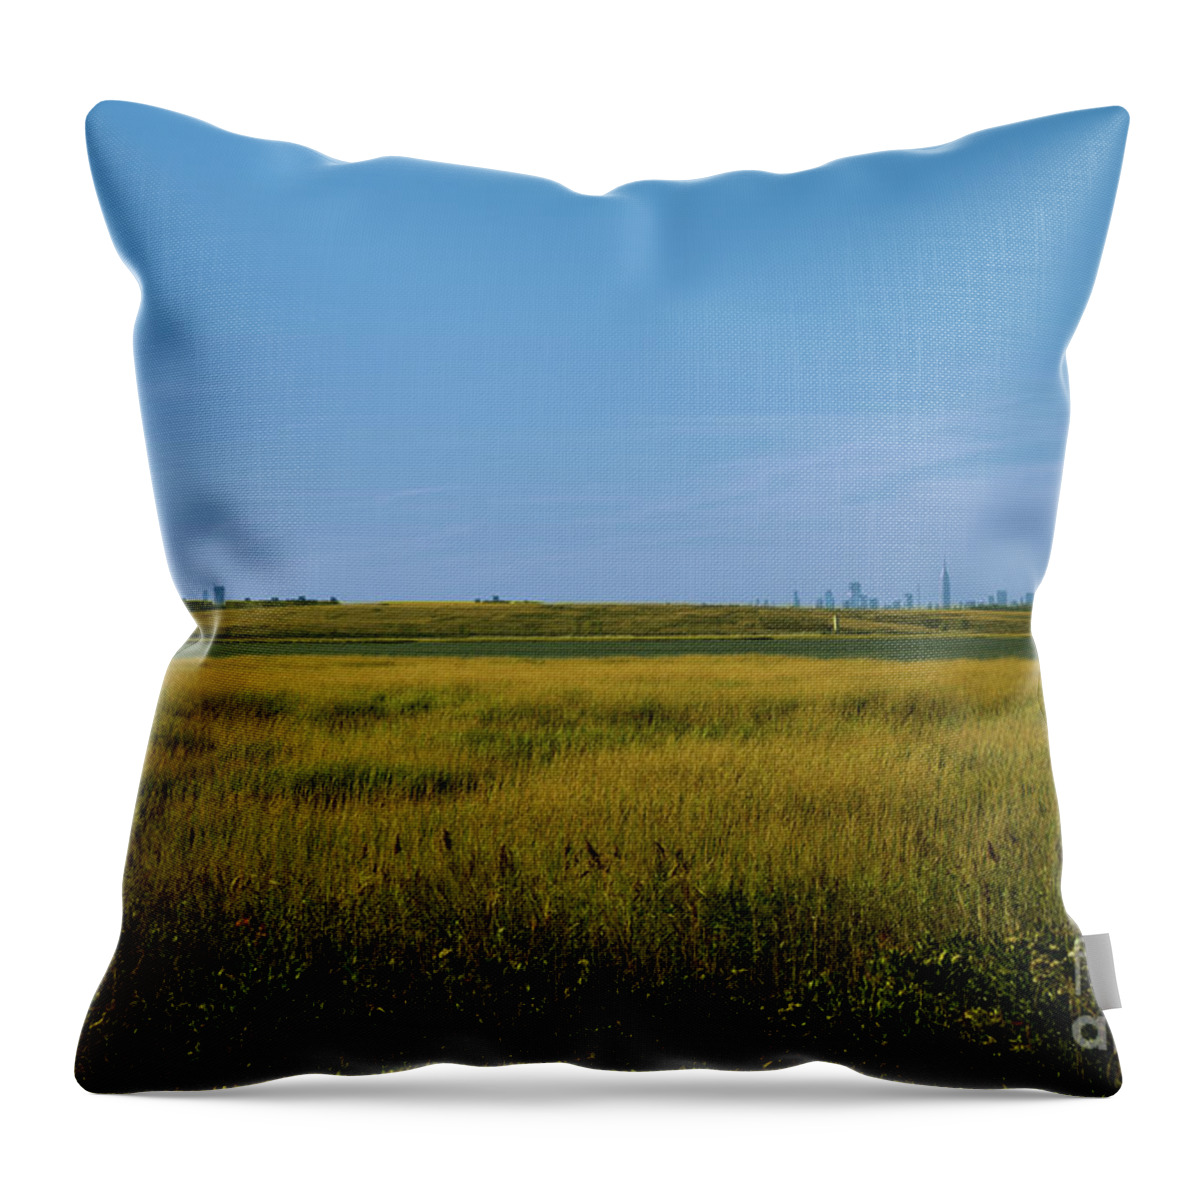 New York Throw Pillow featuring the photograph New York Is With Ukraine by Stef Ko